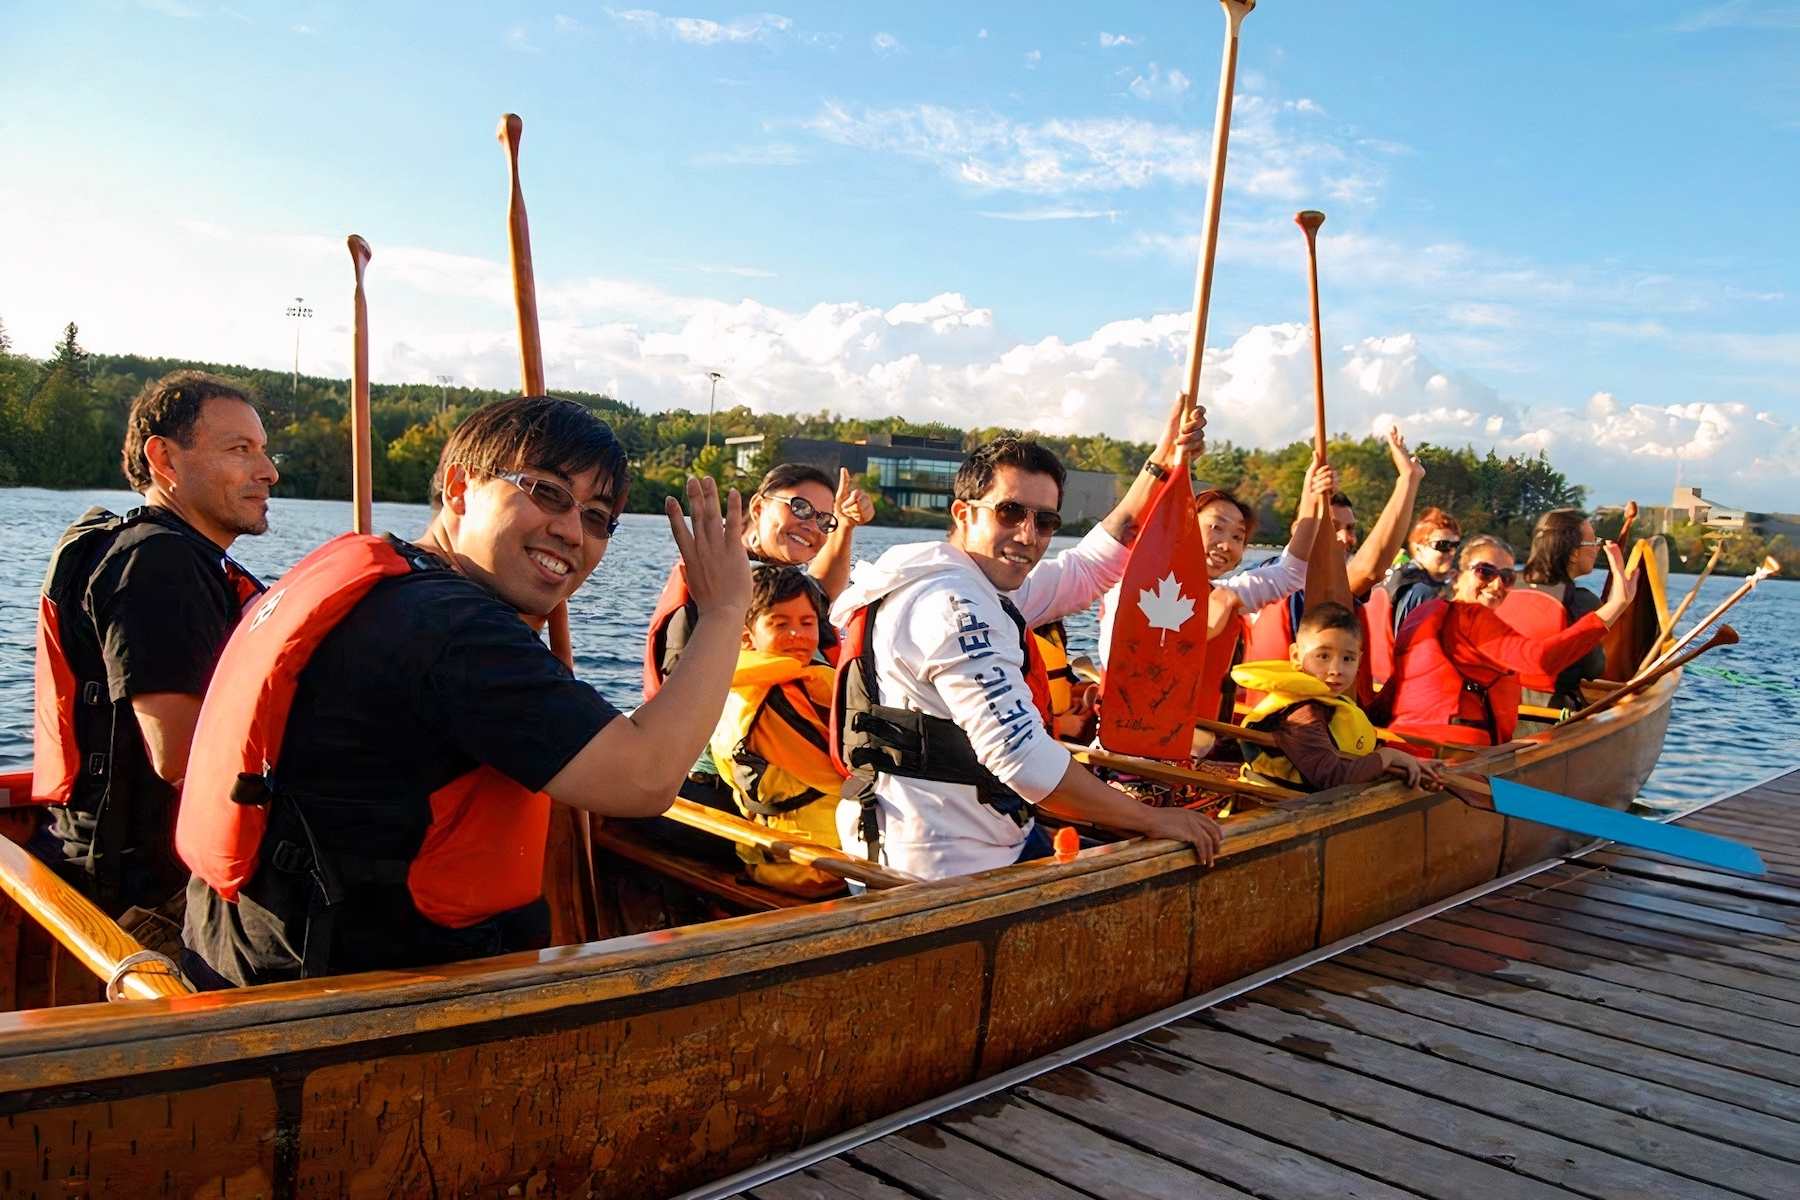 A group of adults and childrens raise their paddles and smile in a Voyageur Canoe about to embark on a paddling tour.